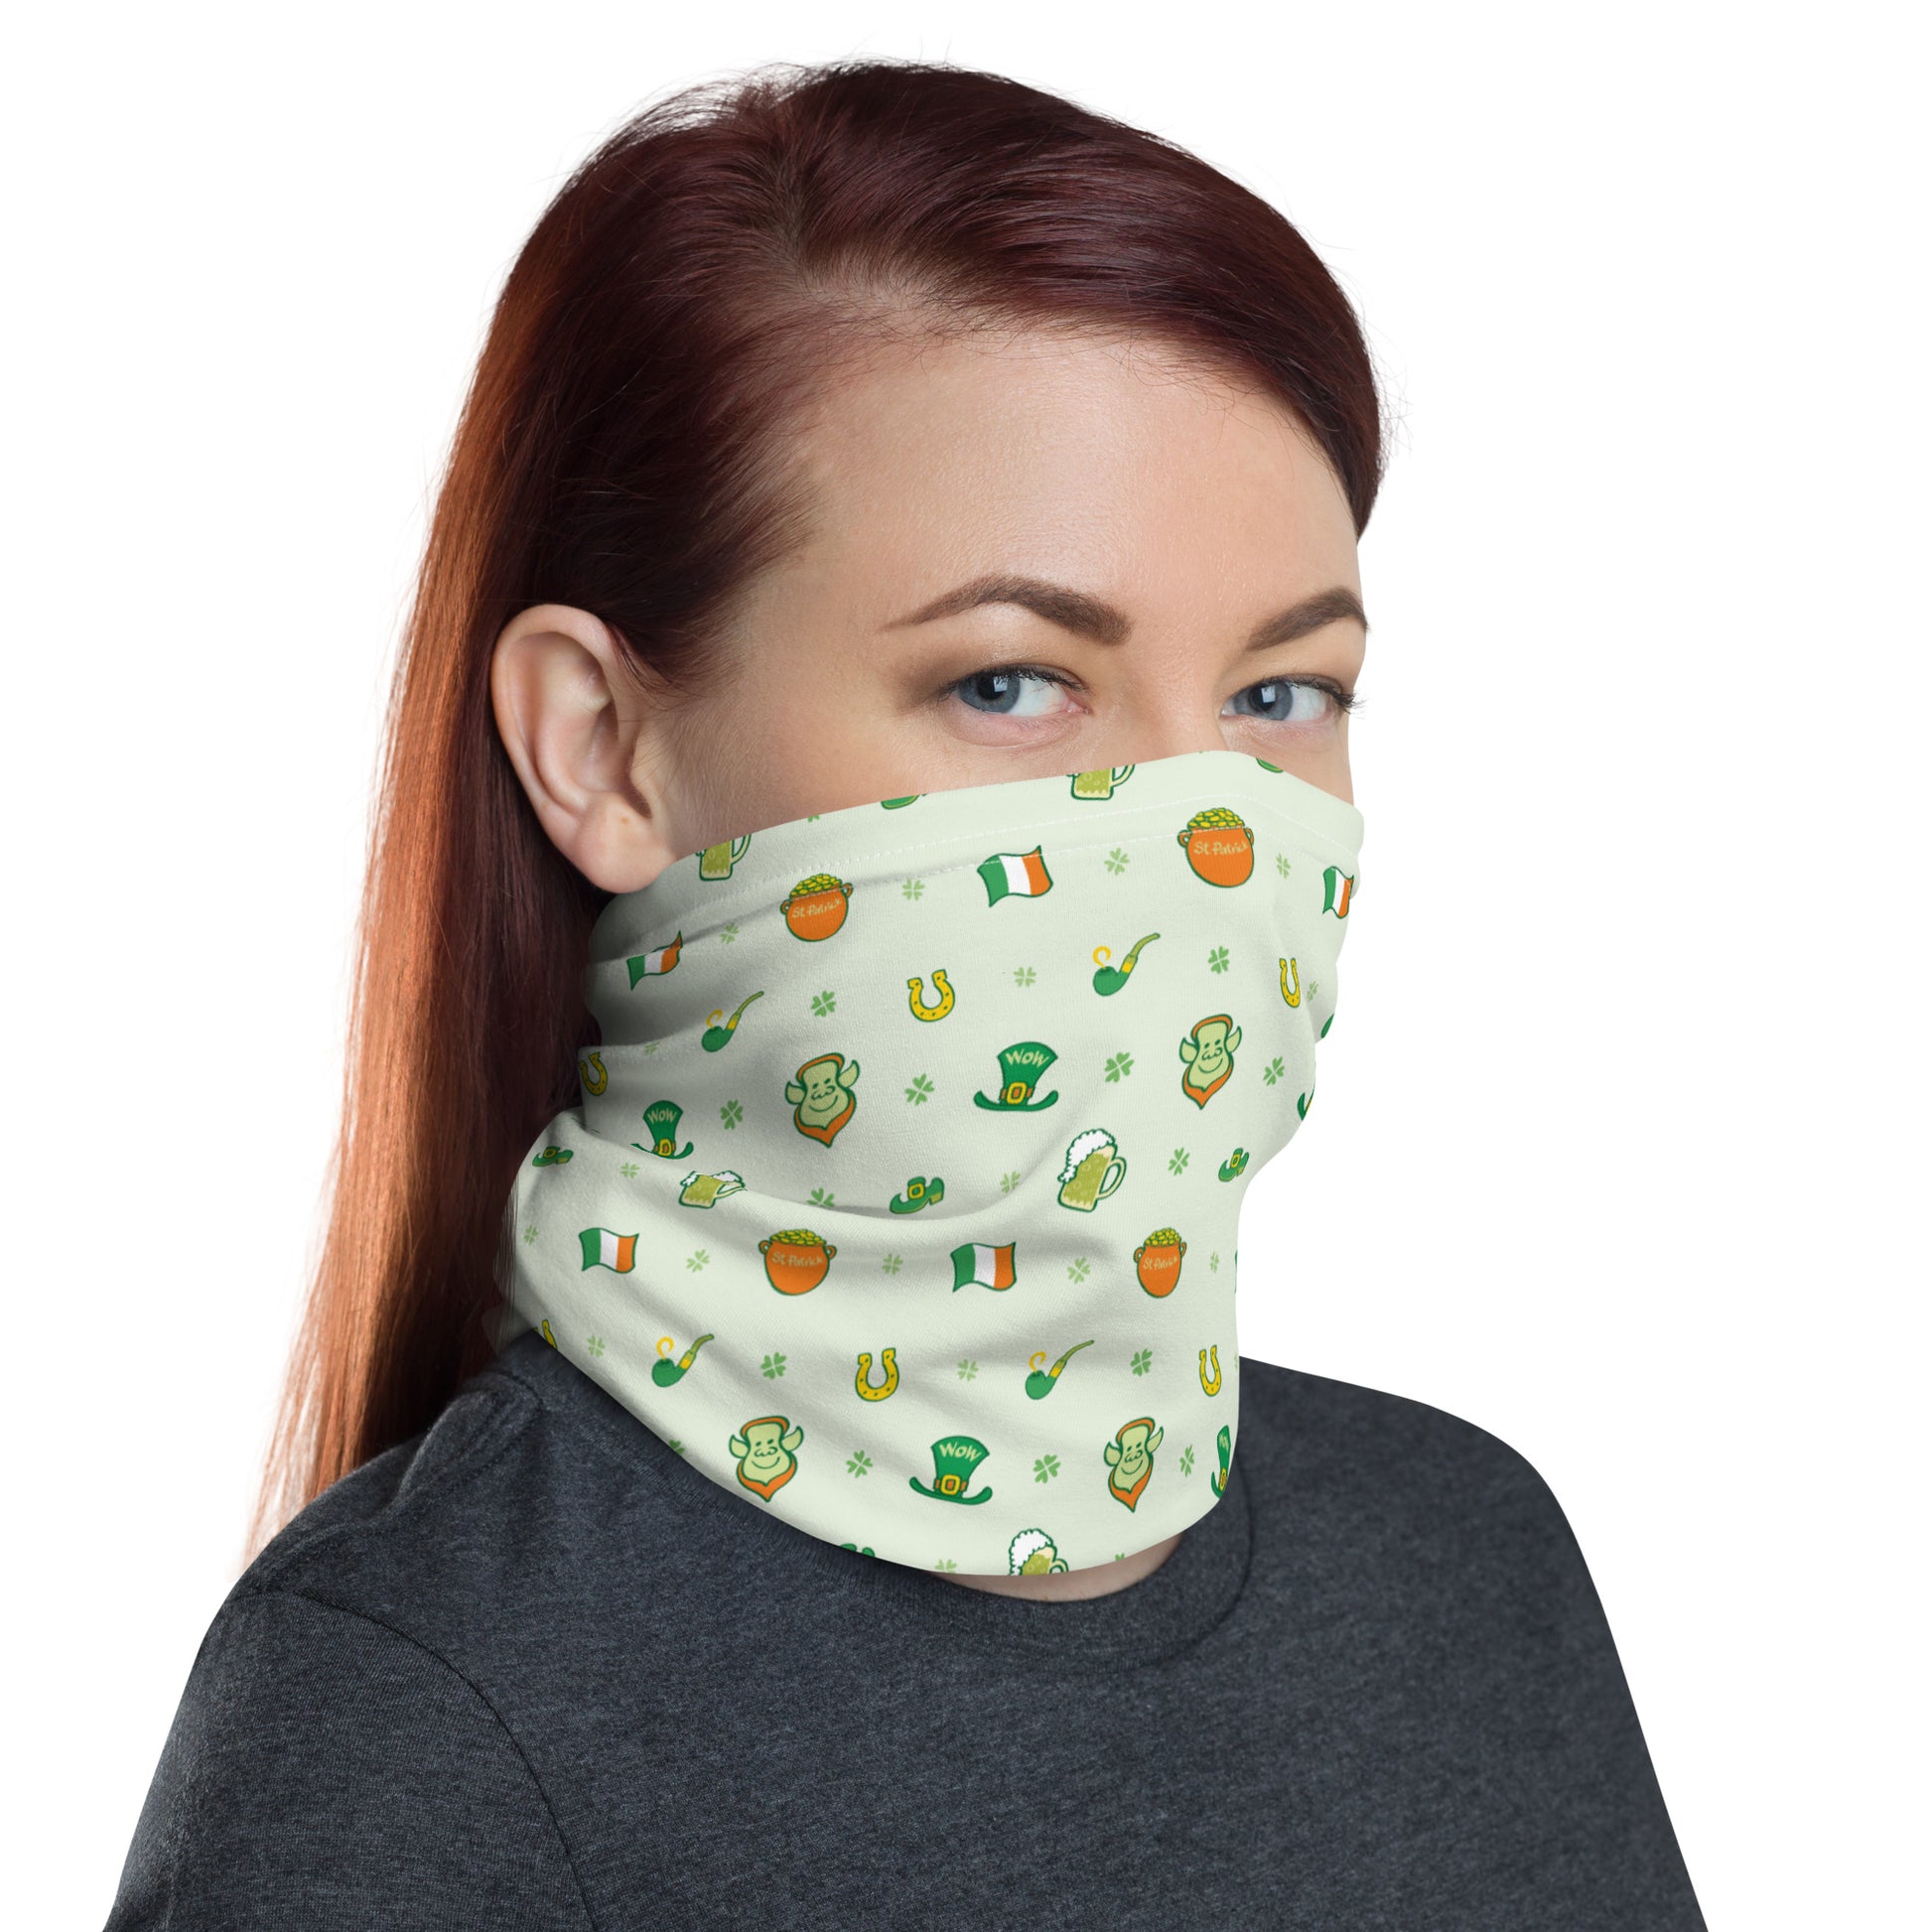 Red-haired woman wearing Neck Gaiter All-over printed with Celebrate Saint Patrick's Day in style pattern design